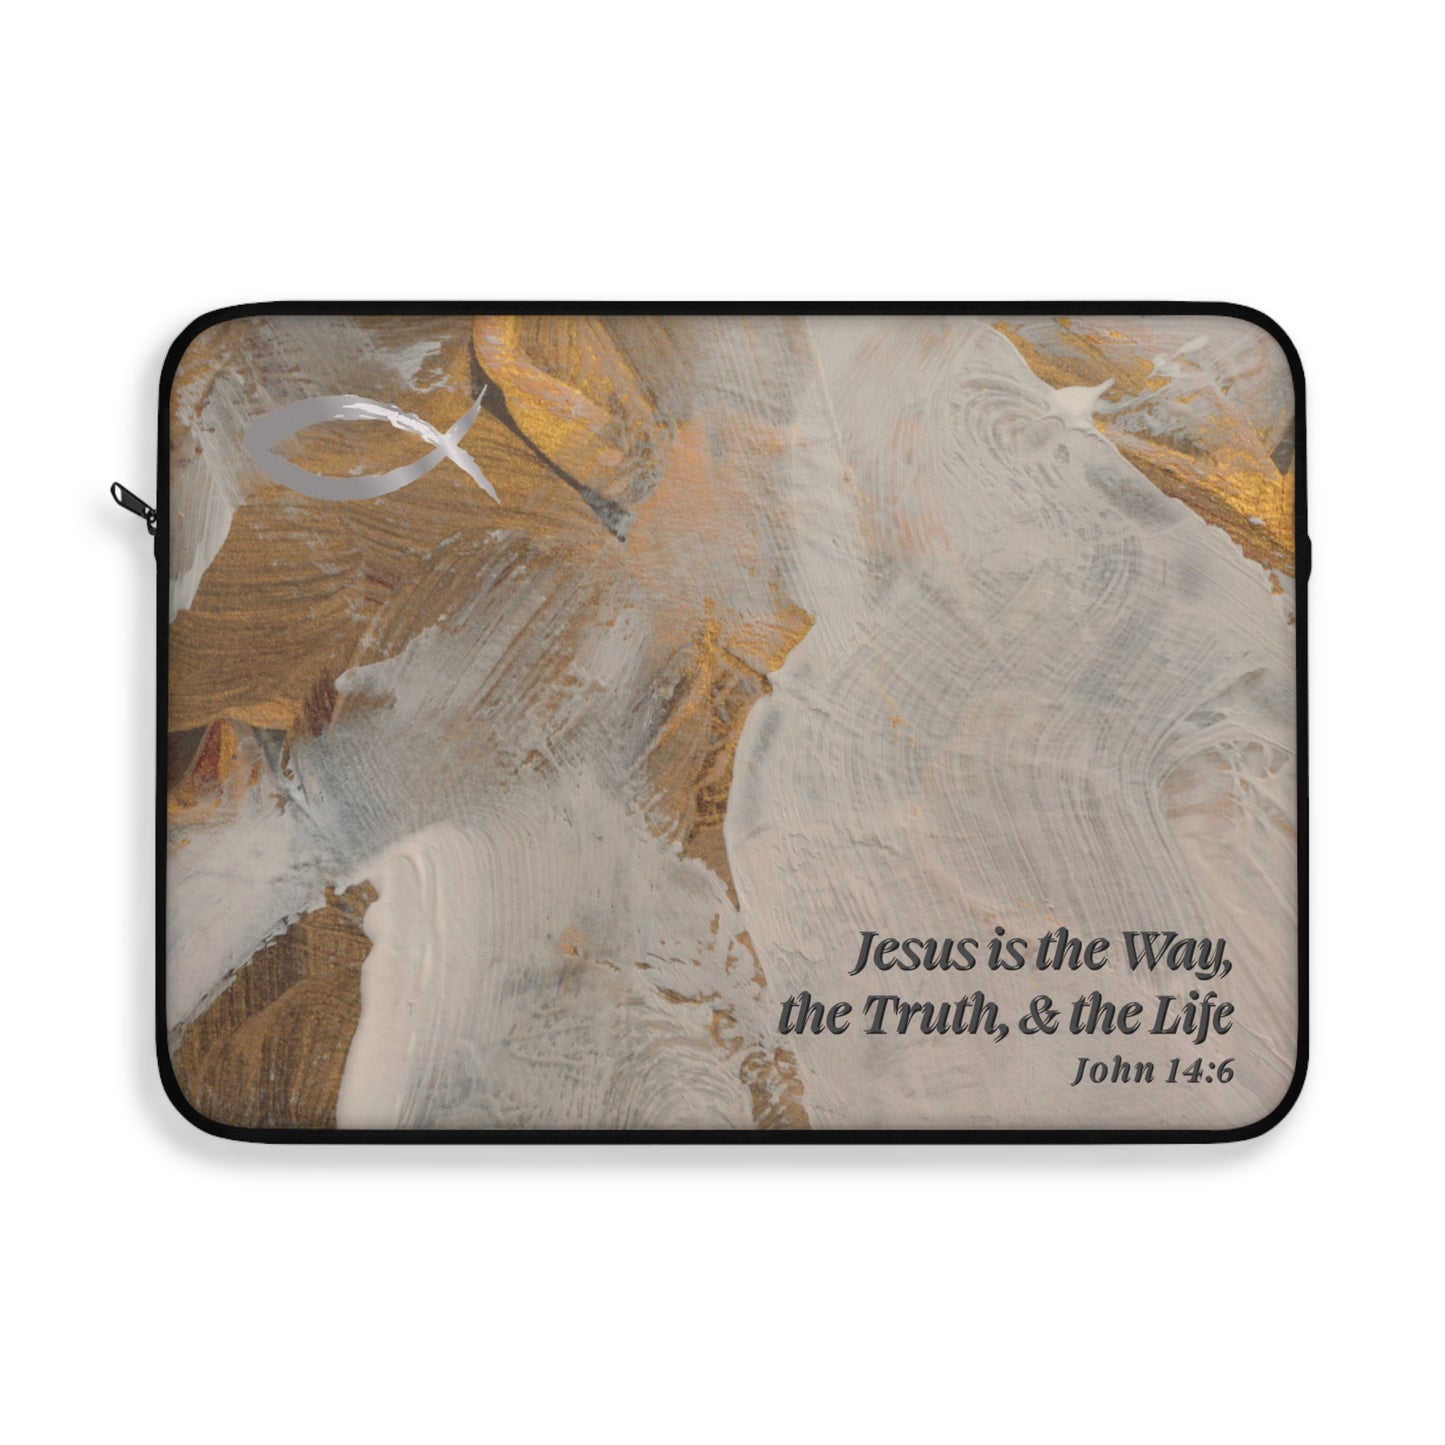 Laptop Sleeve - Jesus is the Way, the Truth, & the Life